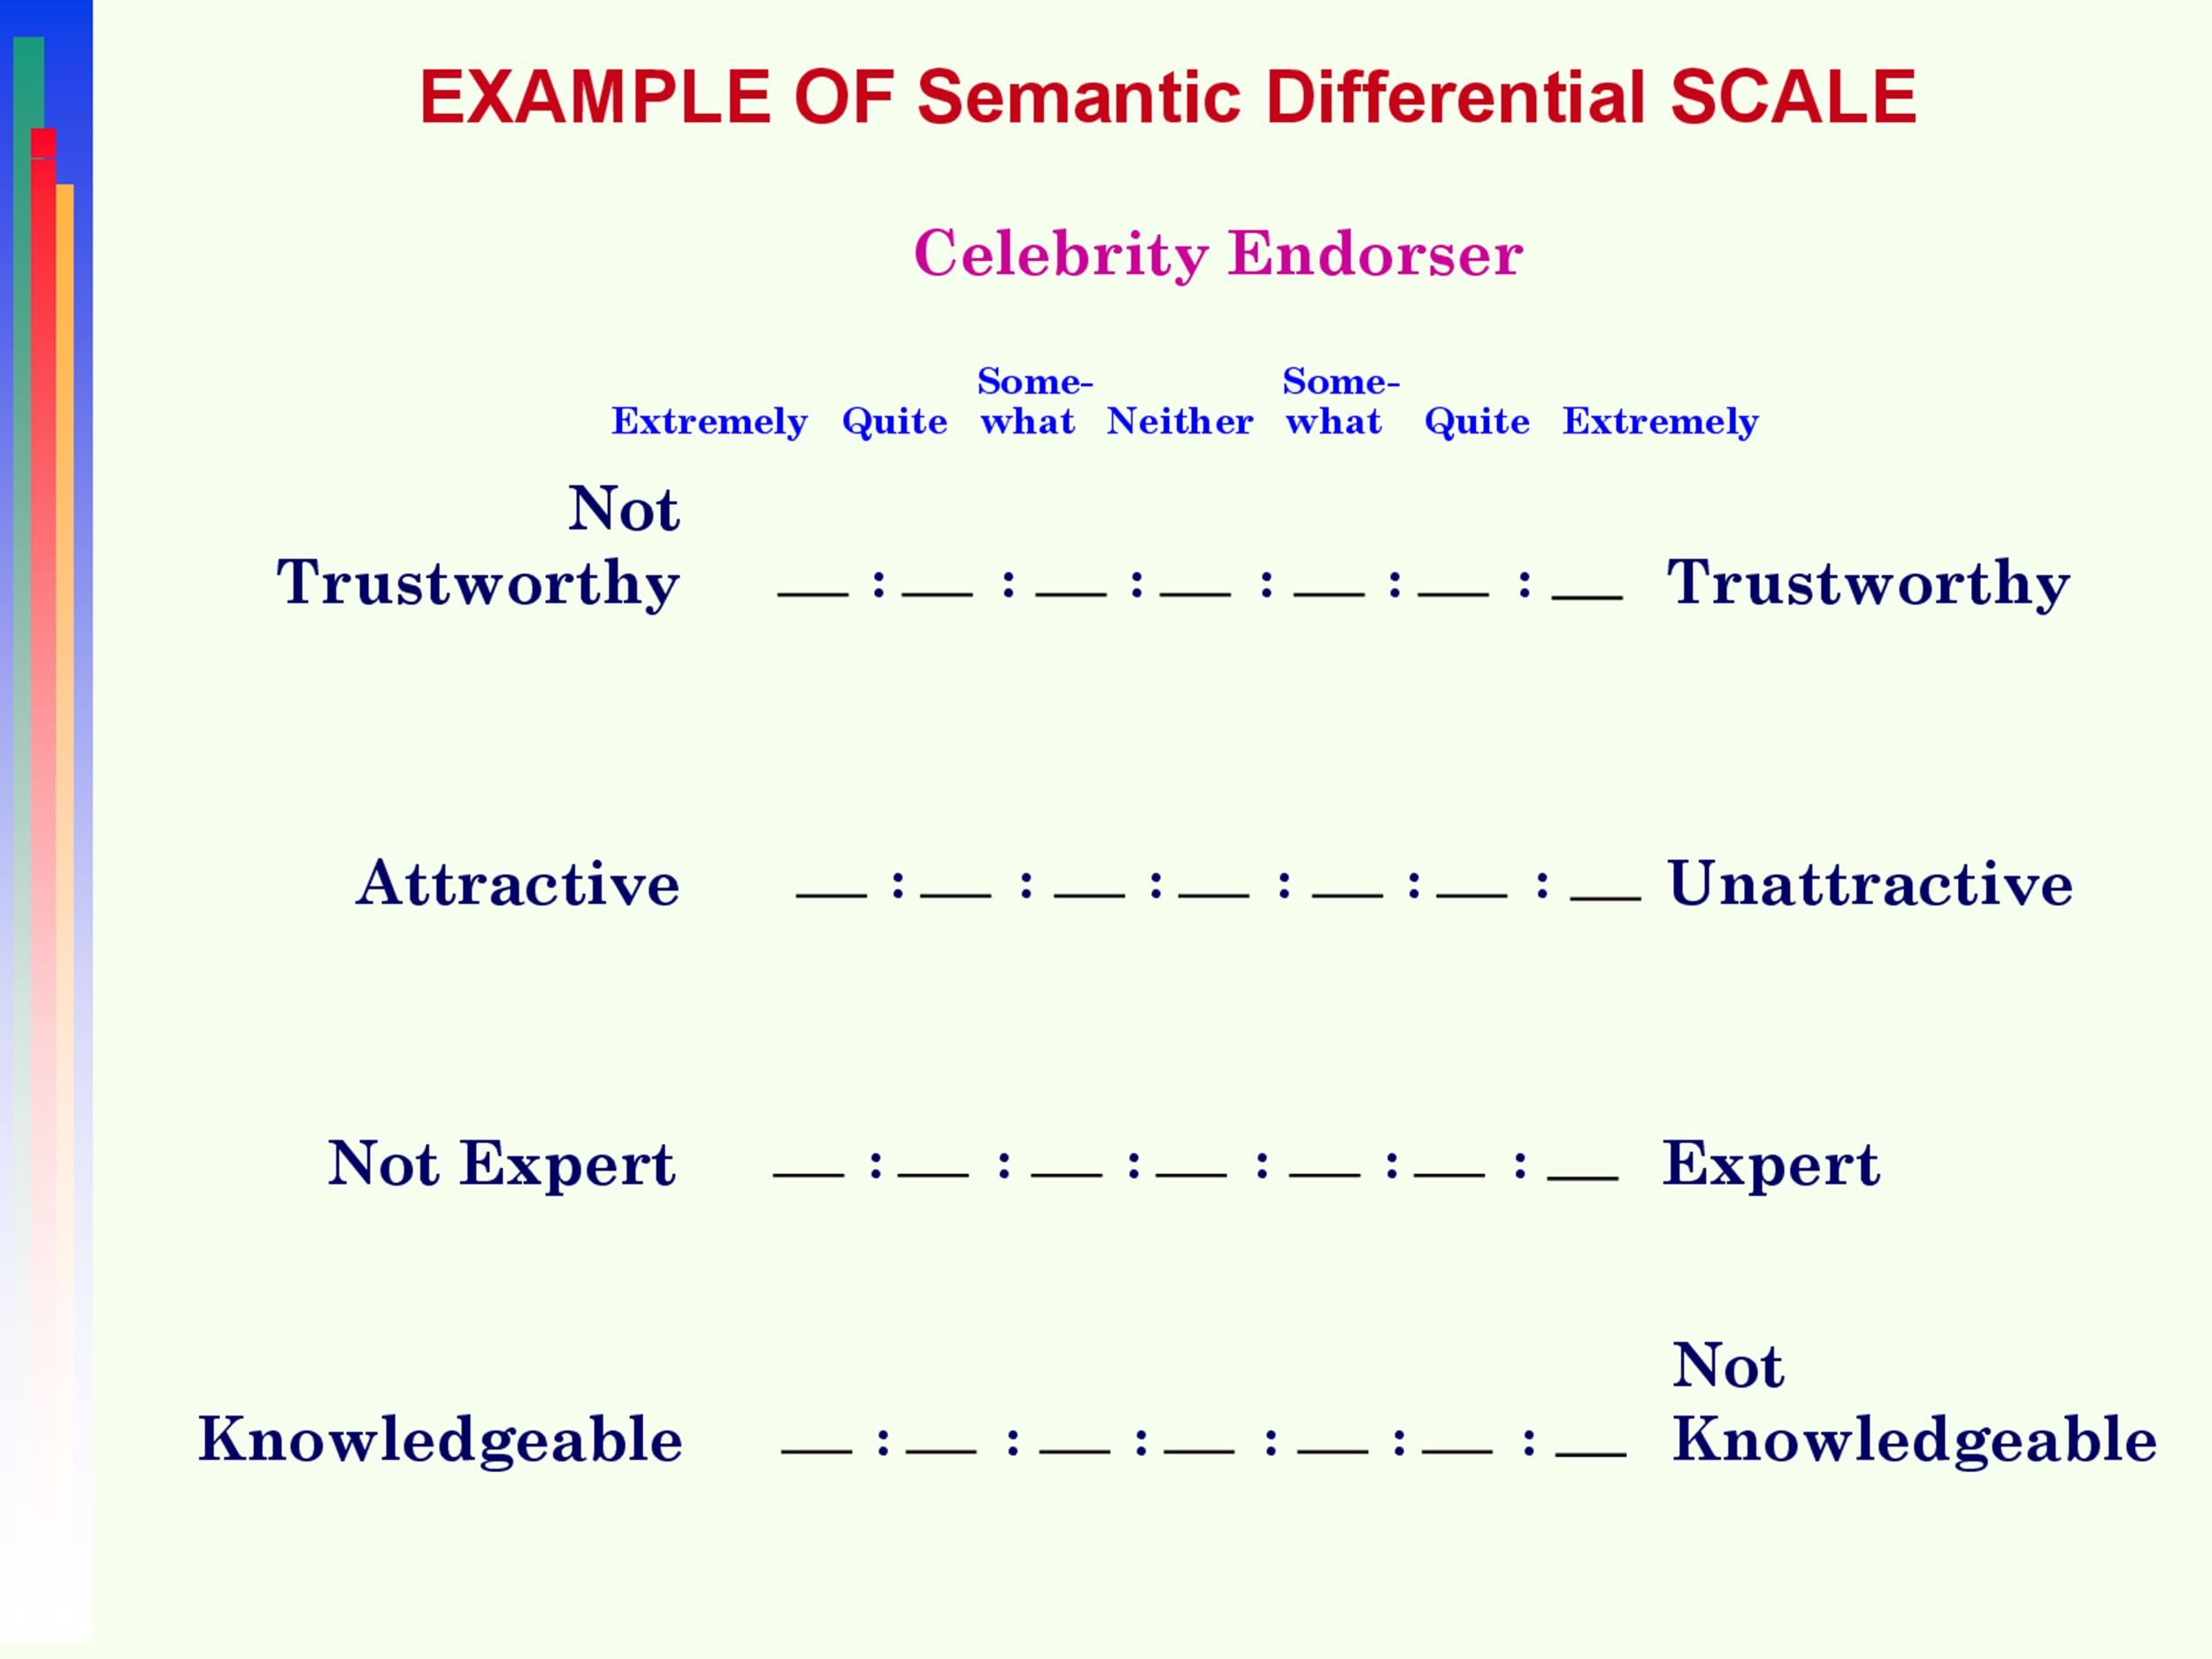 30 Free Likert Scale Templates & Examples ᐅ TemplateLab